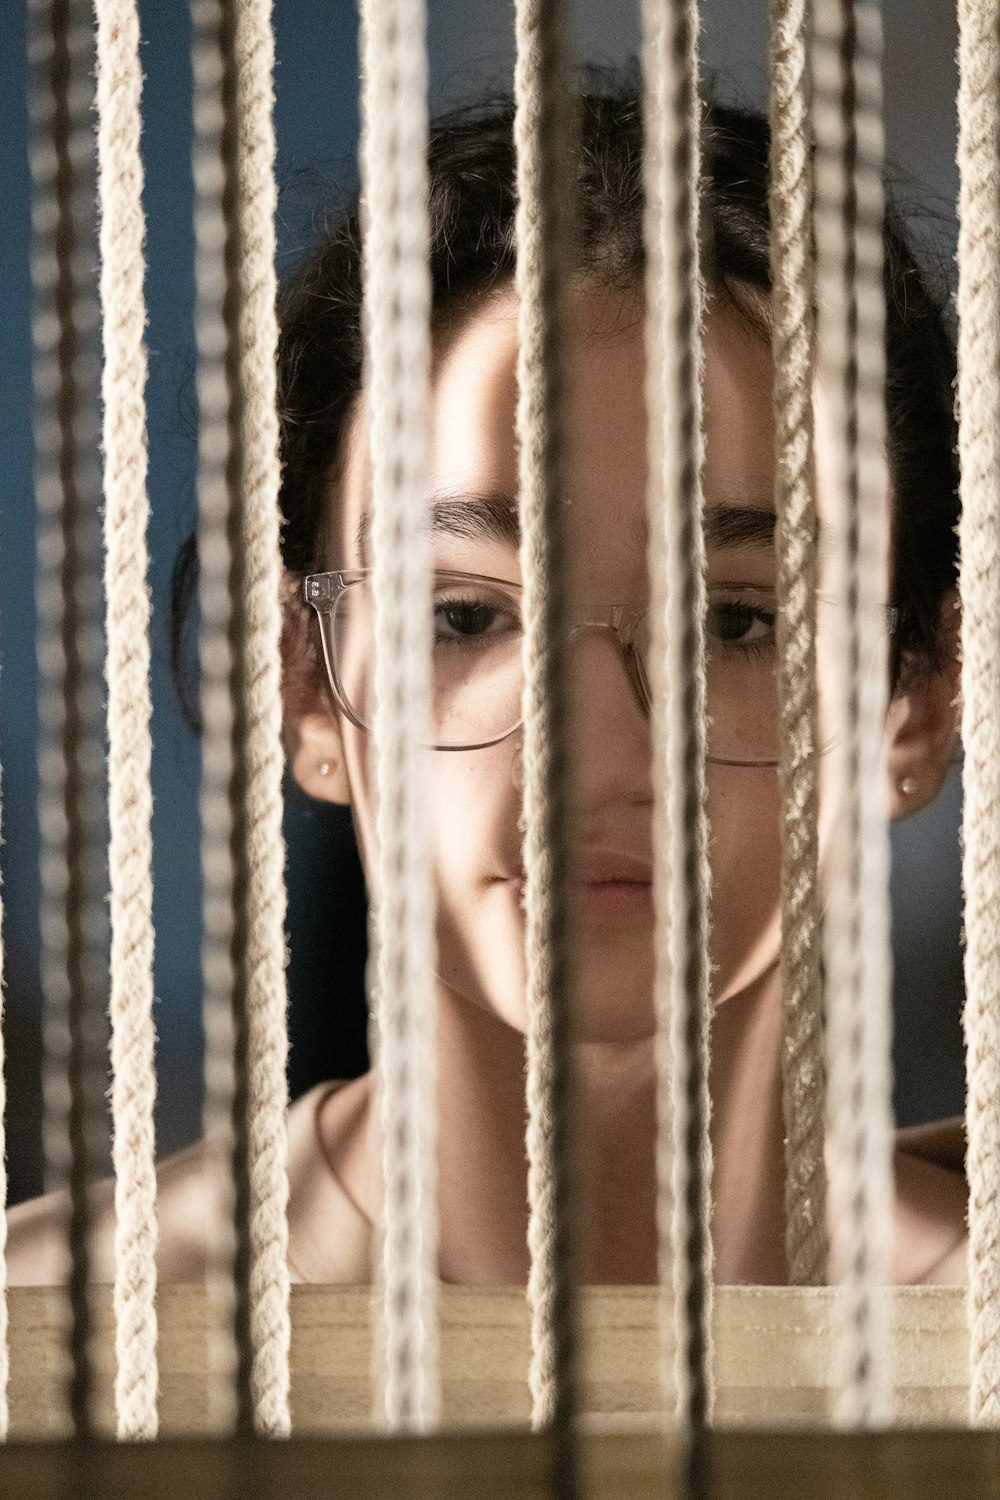 a woman looking through the bars of a jail cell